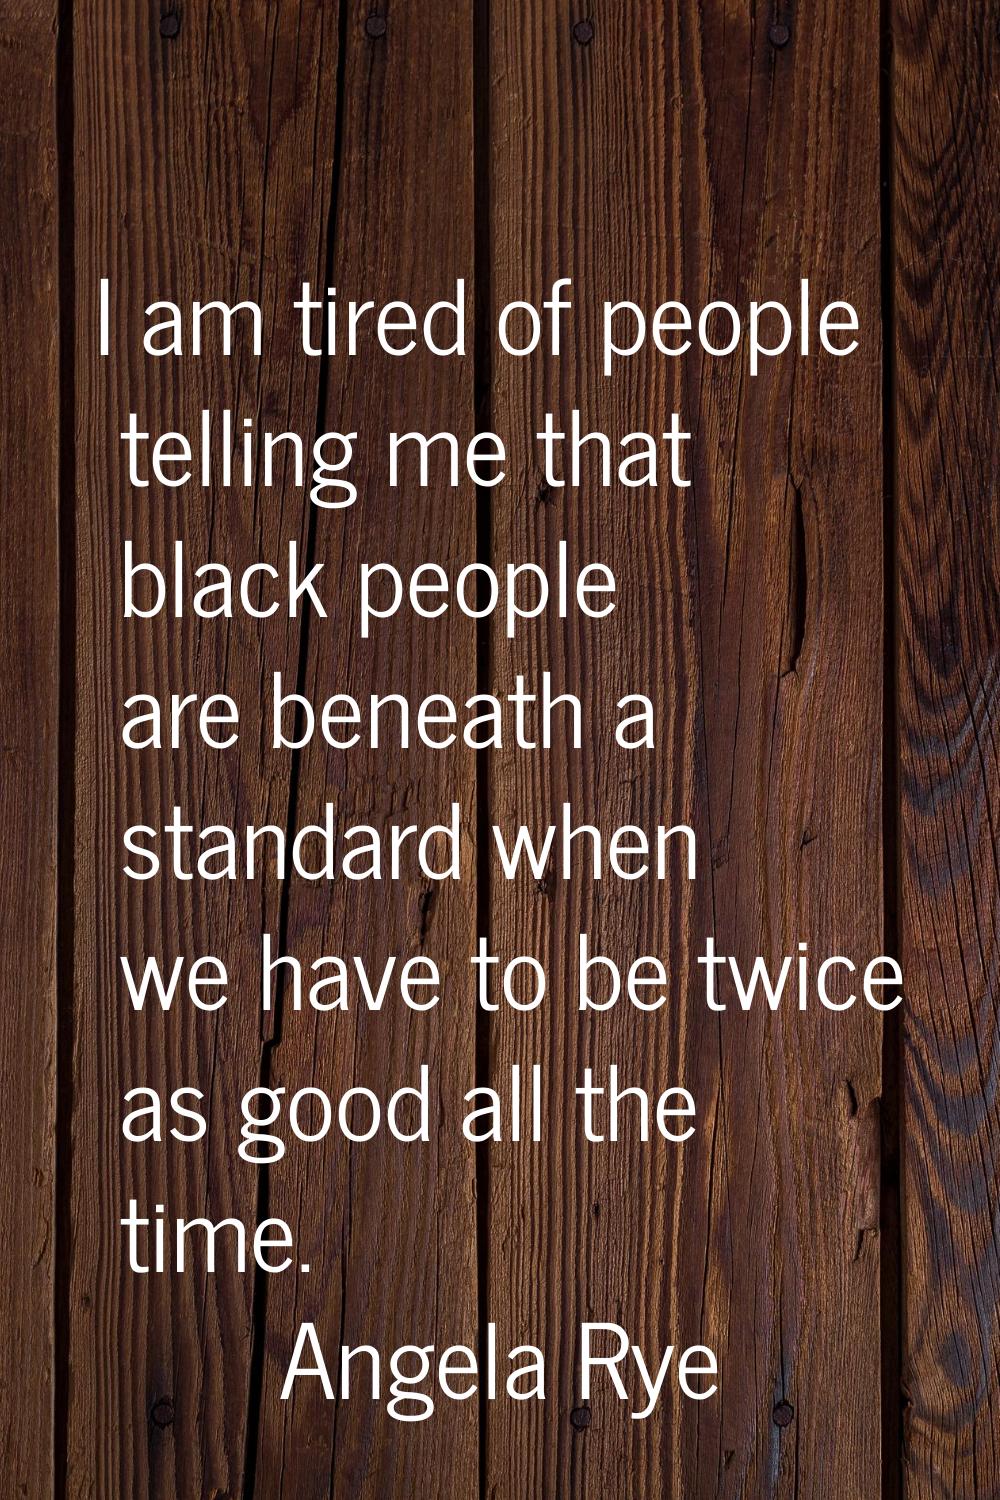 I am tired of people telling me that black people are beneath a standard when we have to be twice a